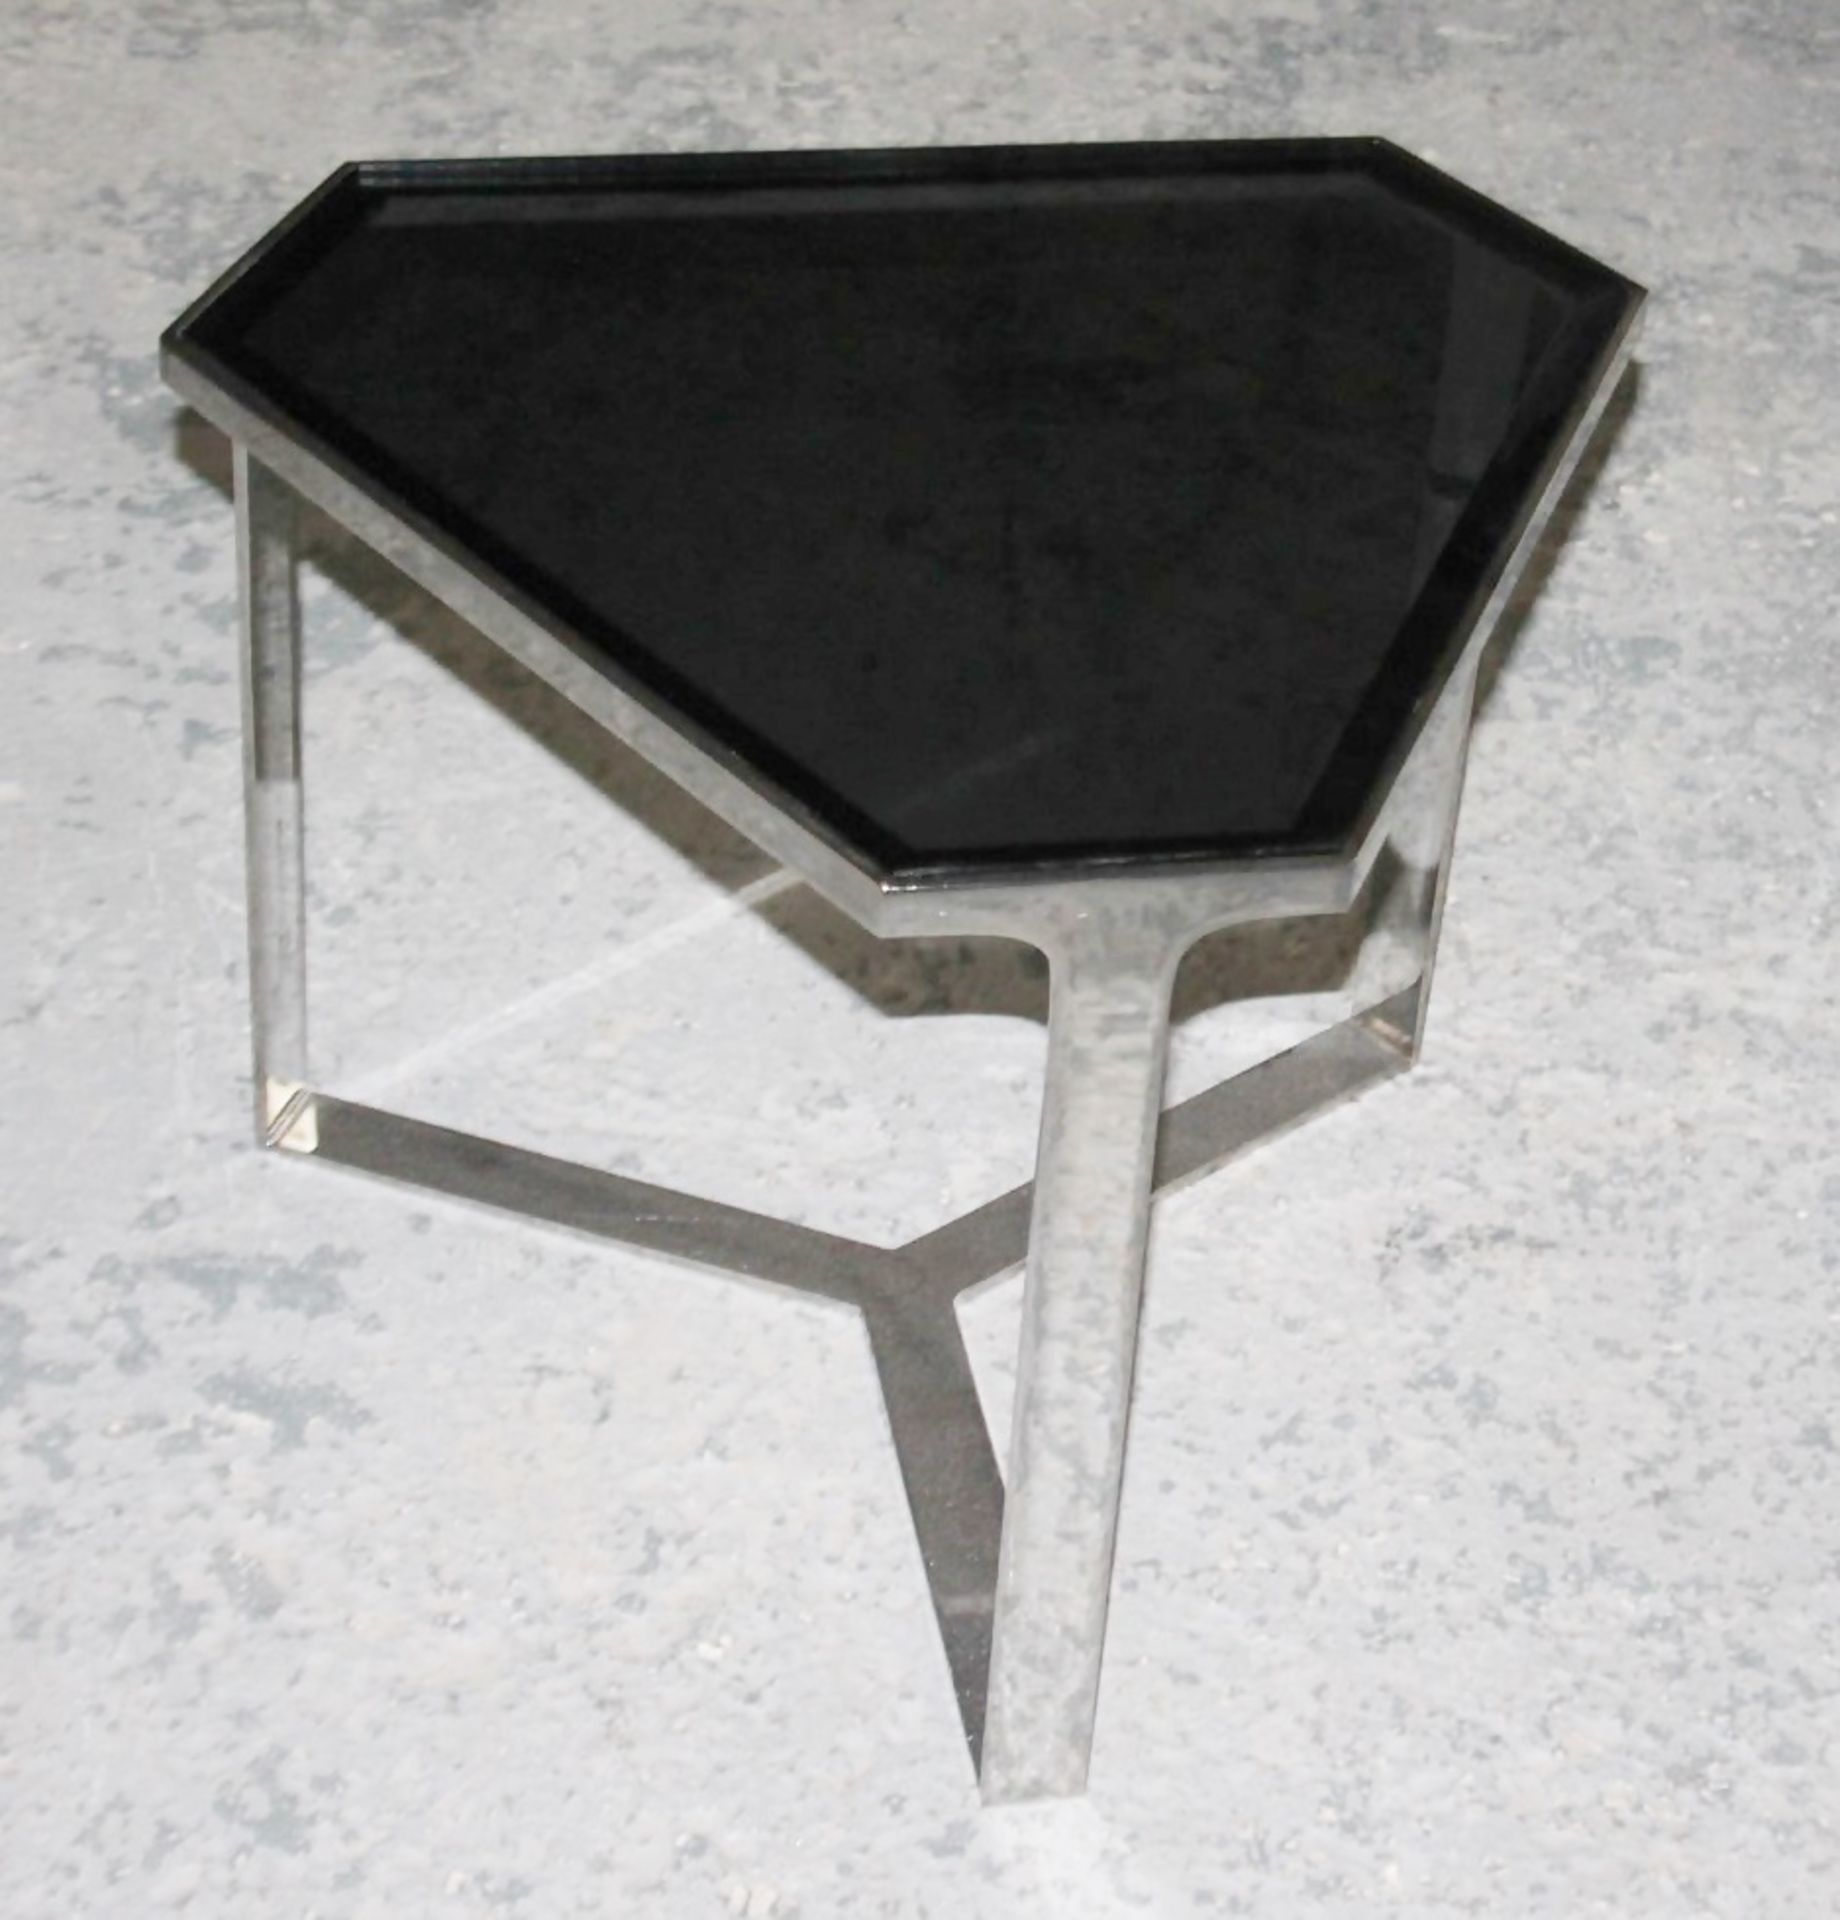 1 x Designer 5-Section Geometric Coffee Table, With Tinted Glass Tops and Chromed Bases - Image 3 of 6